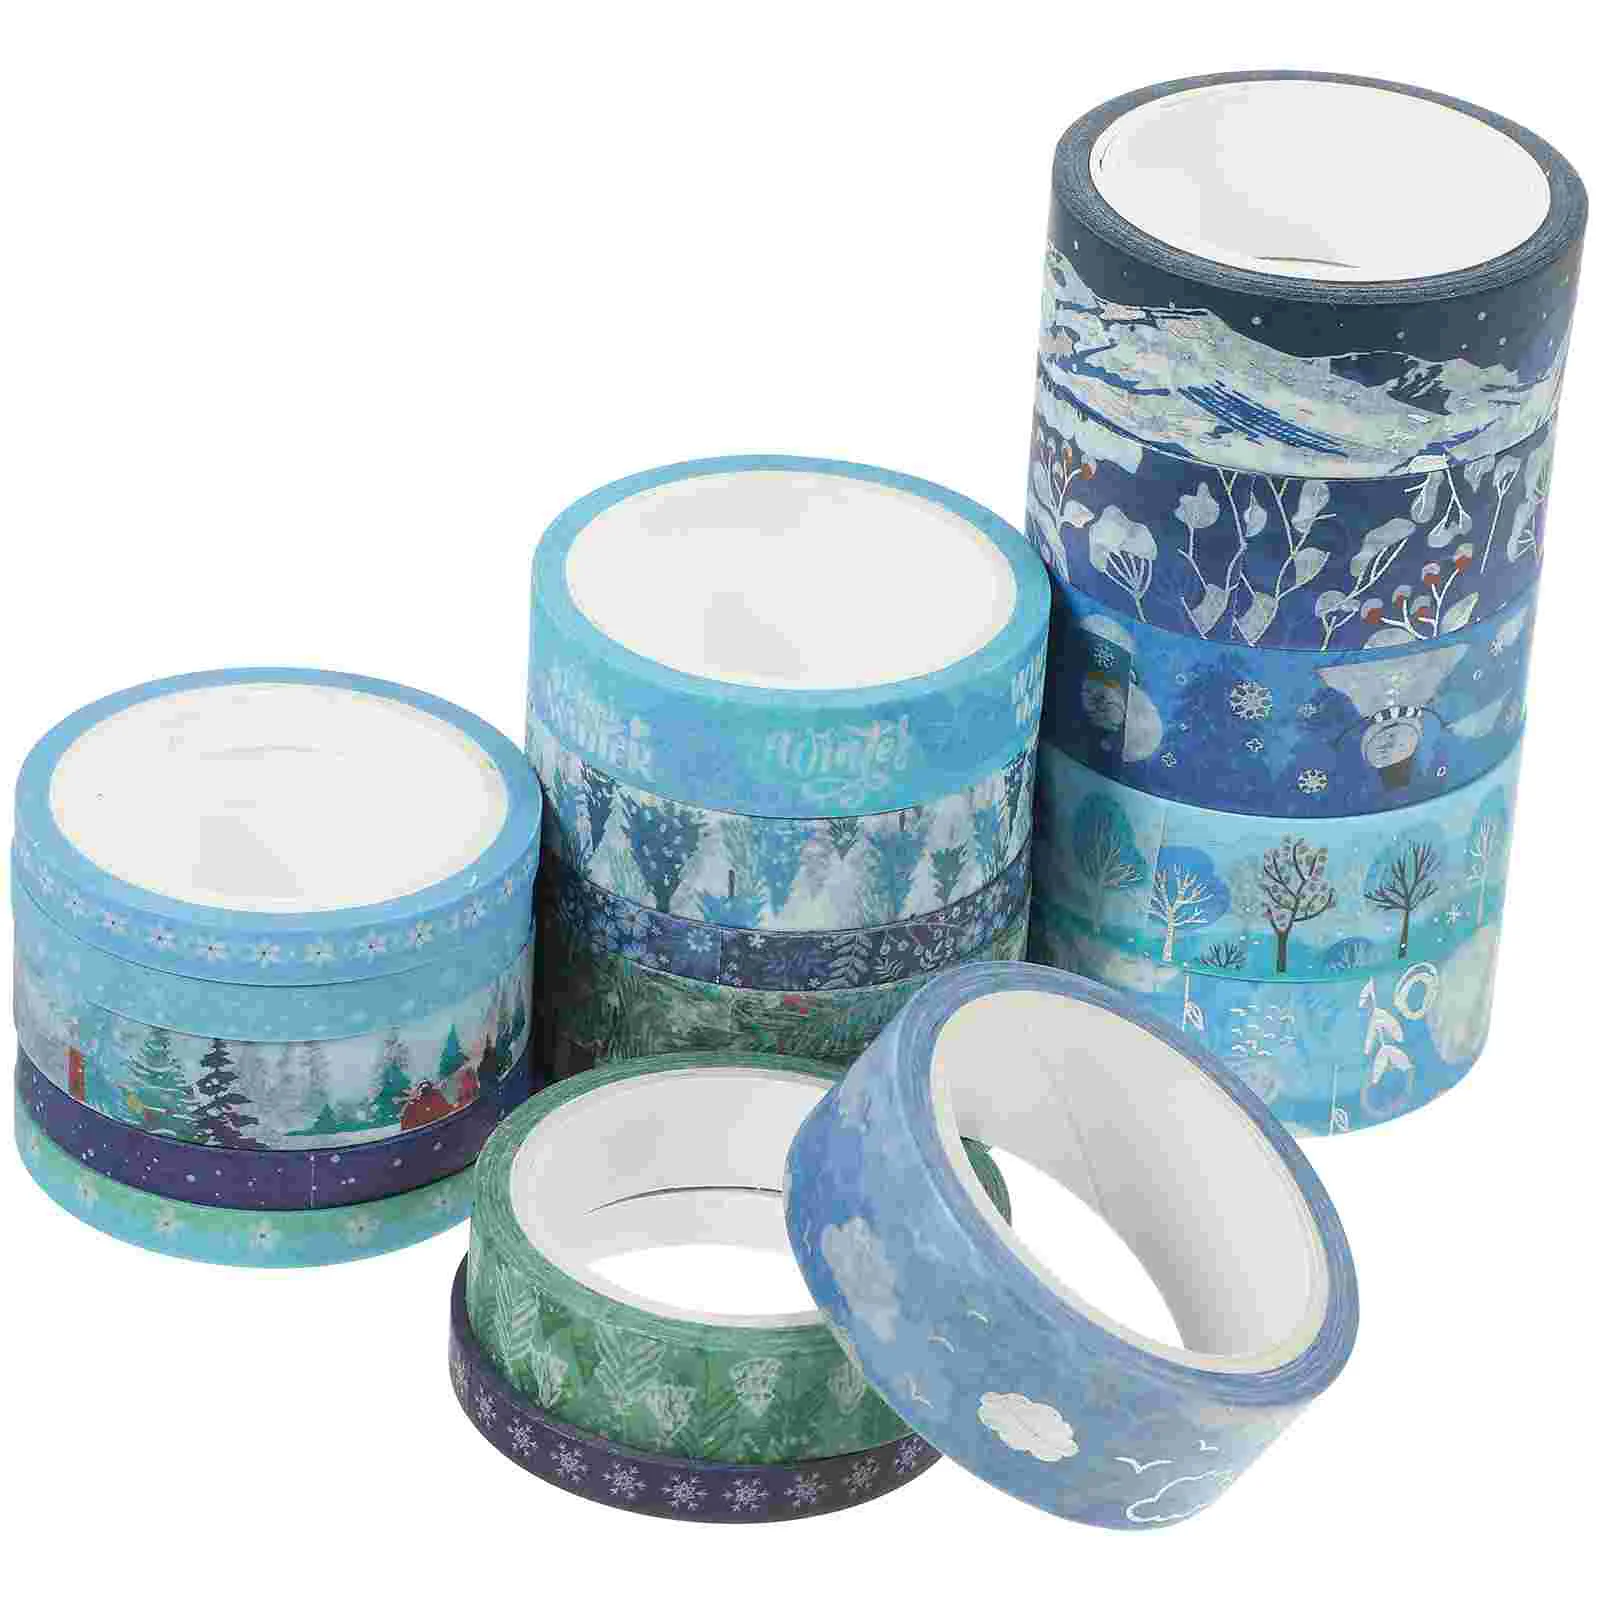 

19 Rolls Christmas Trees Washi Tapes Scrapbook DIY Delicate Journaling Decorative